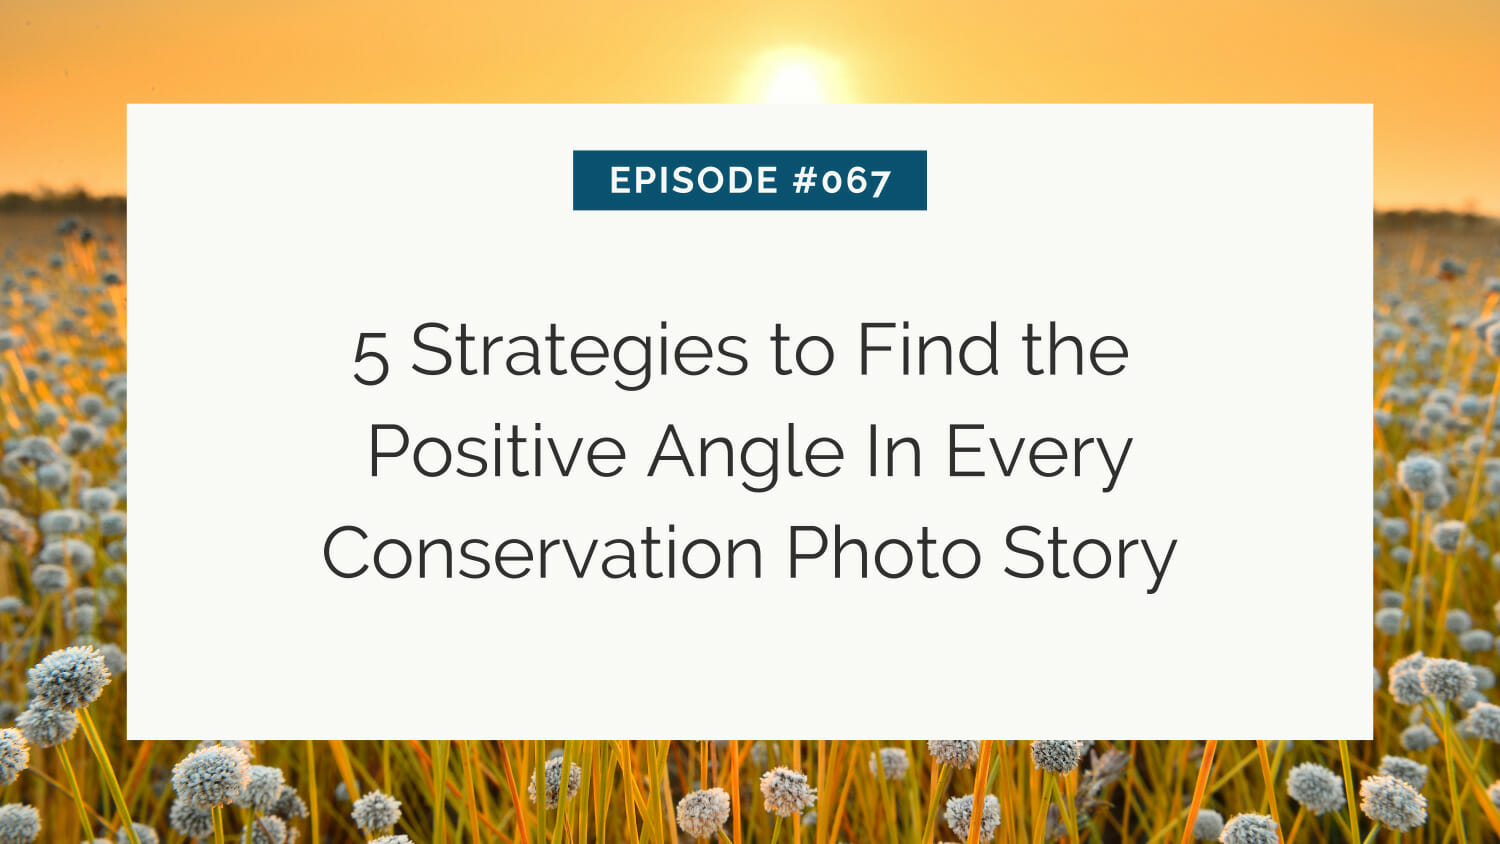 Title slide for episode #067 on "5 strategies to find the positive angle in every conservation photo story" set against a background of a field with dandelions at sunset.